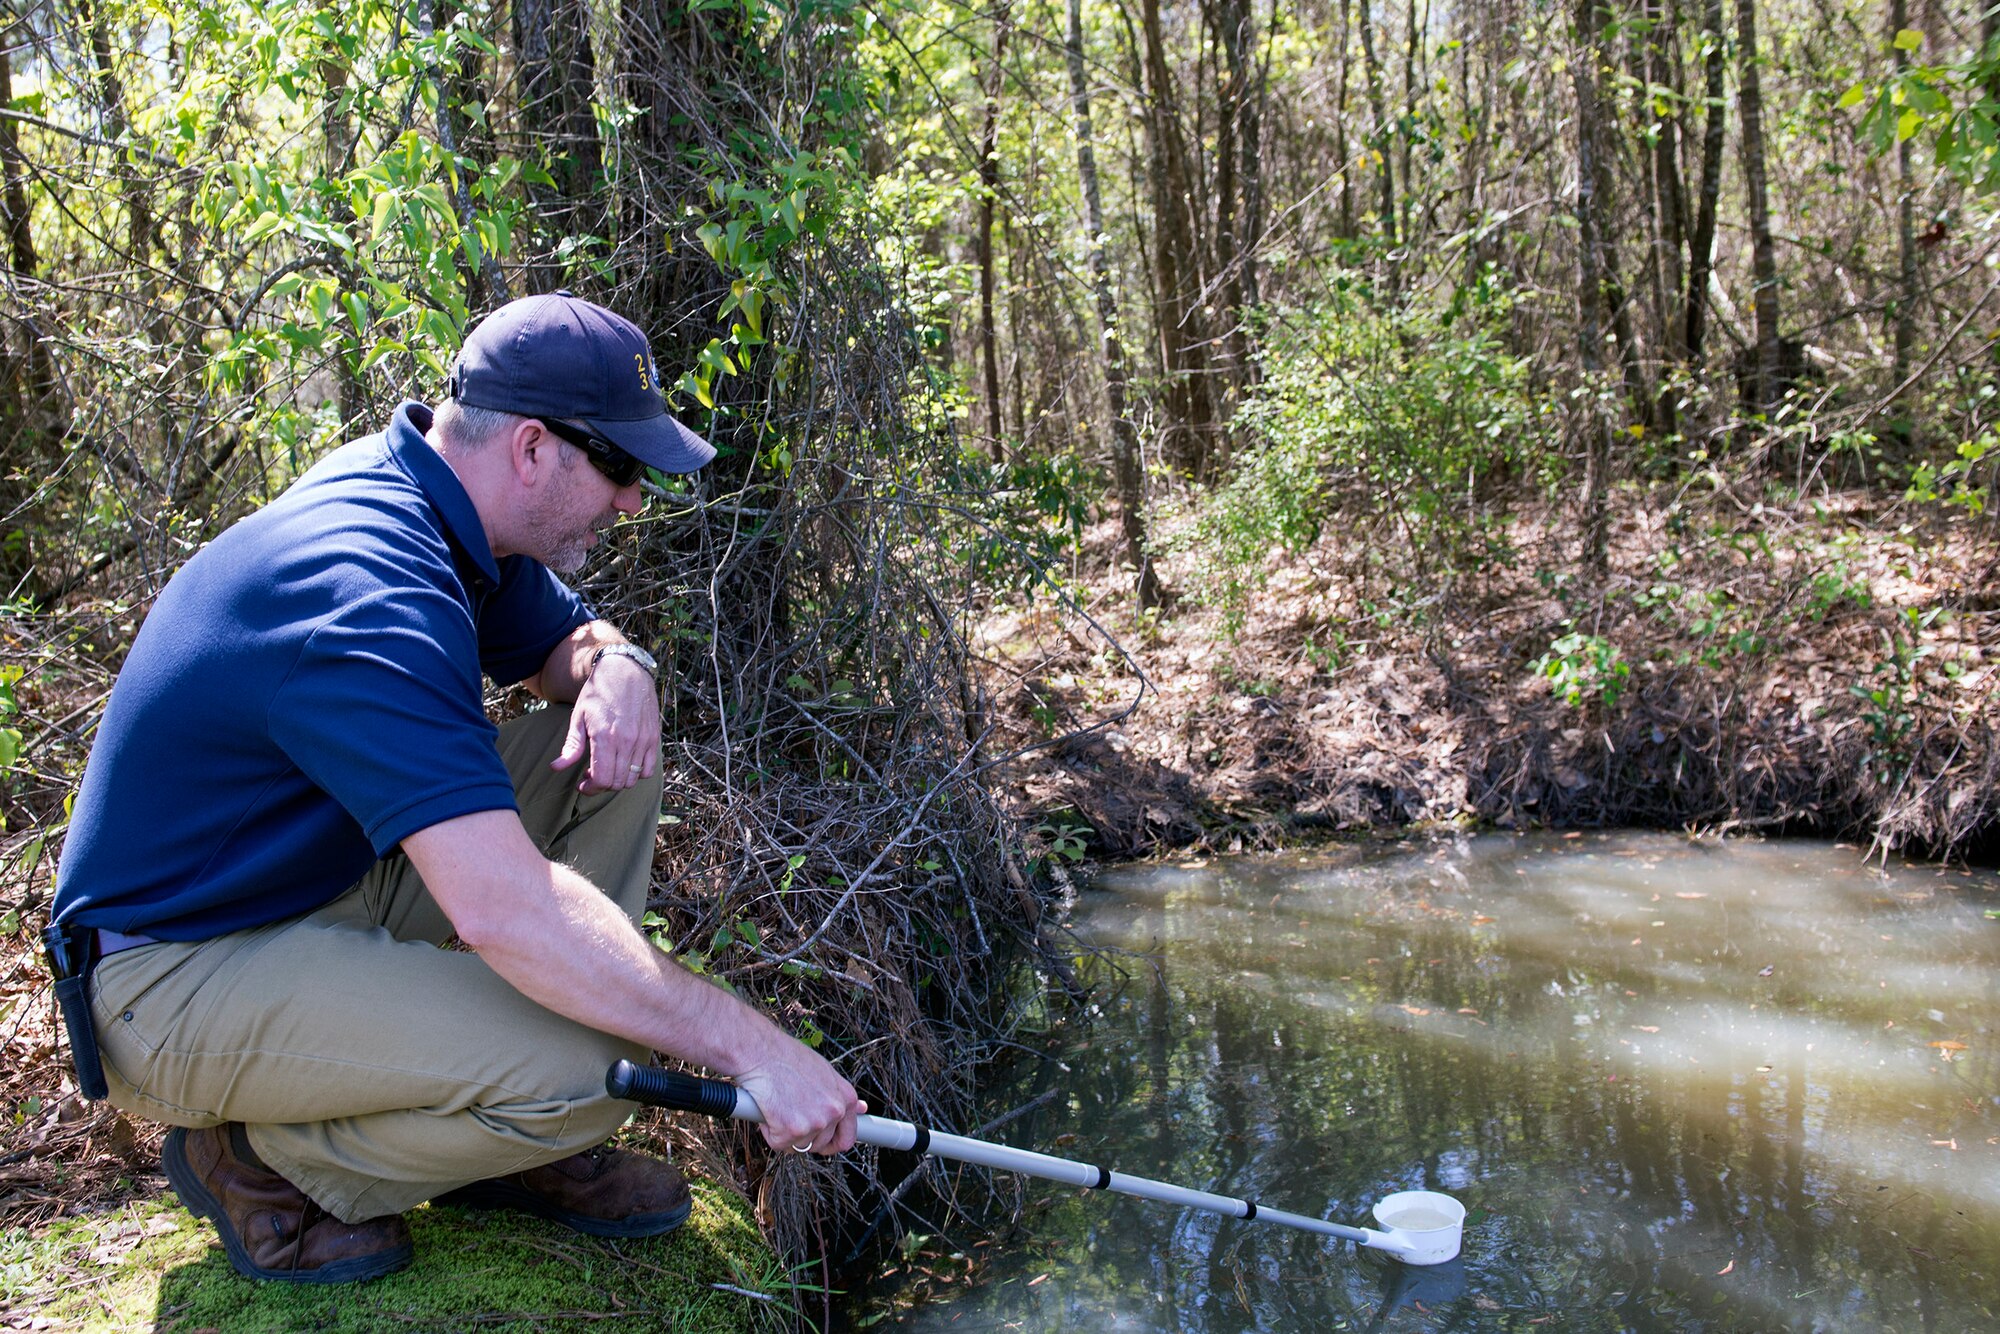 Bryon Kacprzyk, 23d Civil Engineer Squadron pest control supervisor, checks for mosquito larvae, March 23, 2016, at Moody Air Force Base, Ga. The 23d CES entomologists are responsible for surveying, identifying and recommending control measures for disease vectors, arthropod pests, hazardous plants and animals. (U.S. Air Force photo by Airman 1st Class Greg Nash/Released)  